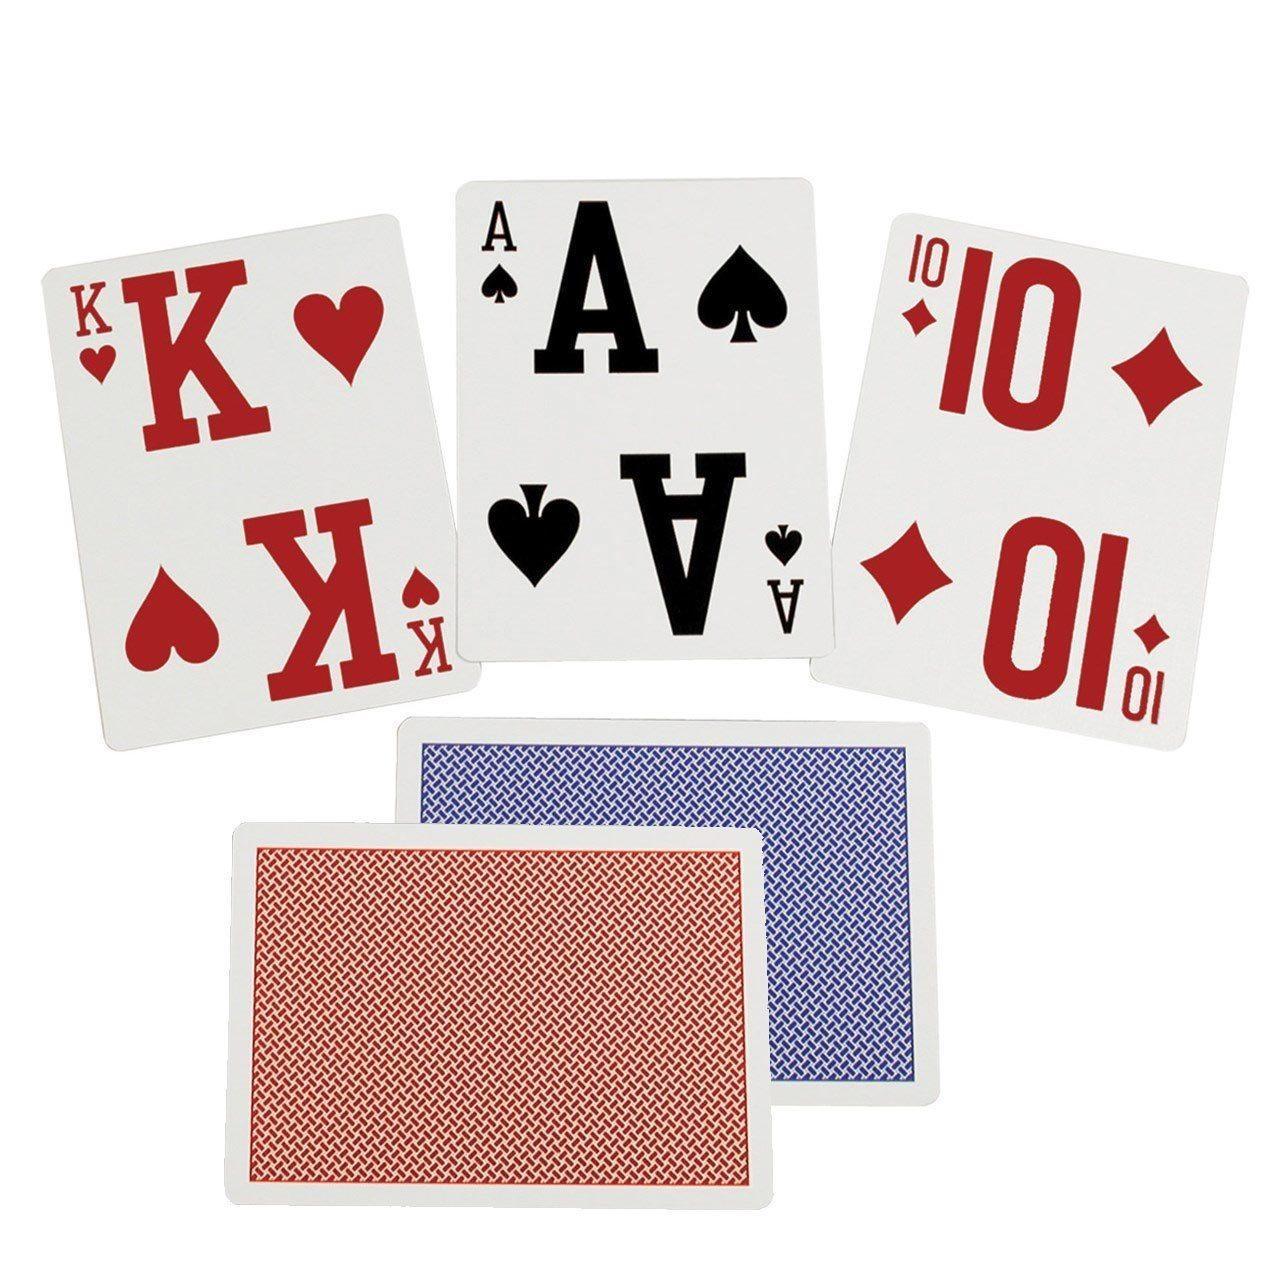 Elite Jumbo Size Low Vision Playing Cards (color may vary) - The Low Vision Store